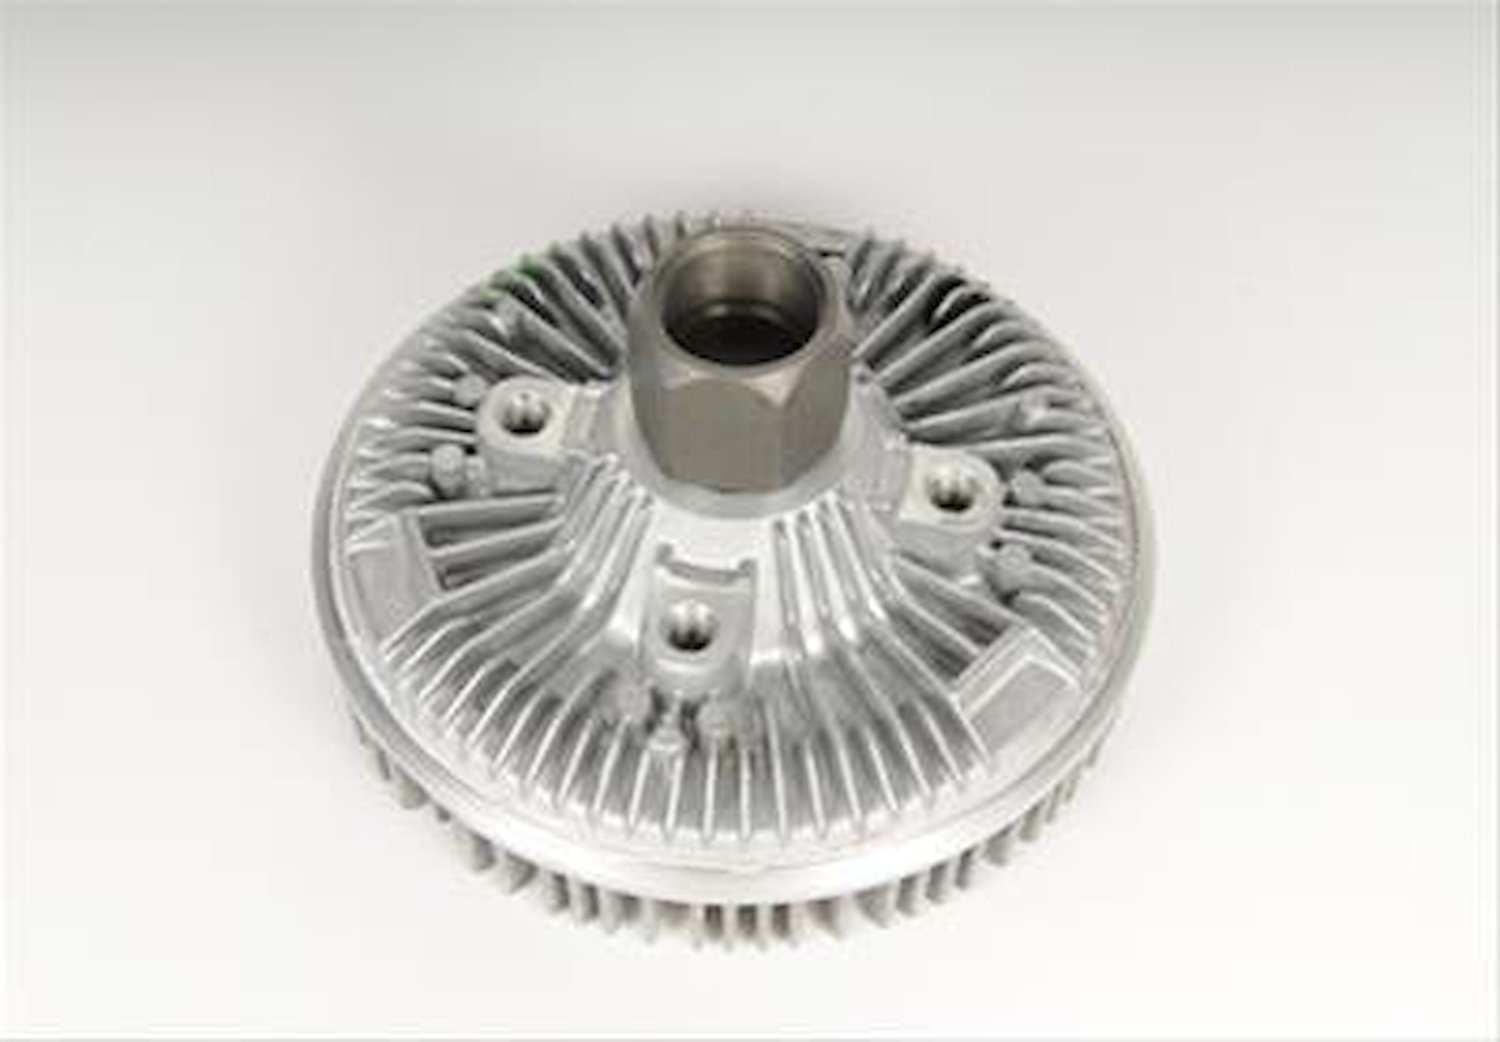 Fan Blade Clutch Assembly Fits Select 1999-2013 Cadillac, Chevrolet, GMC